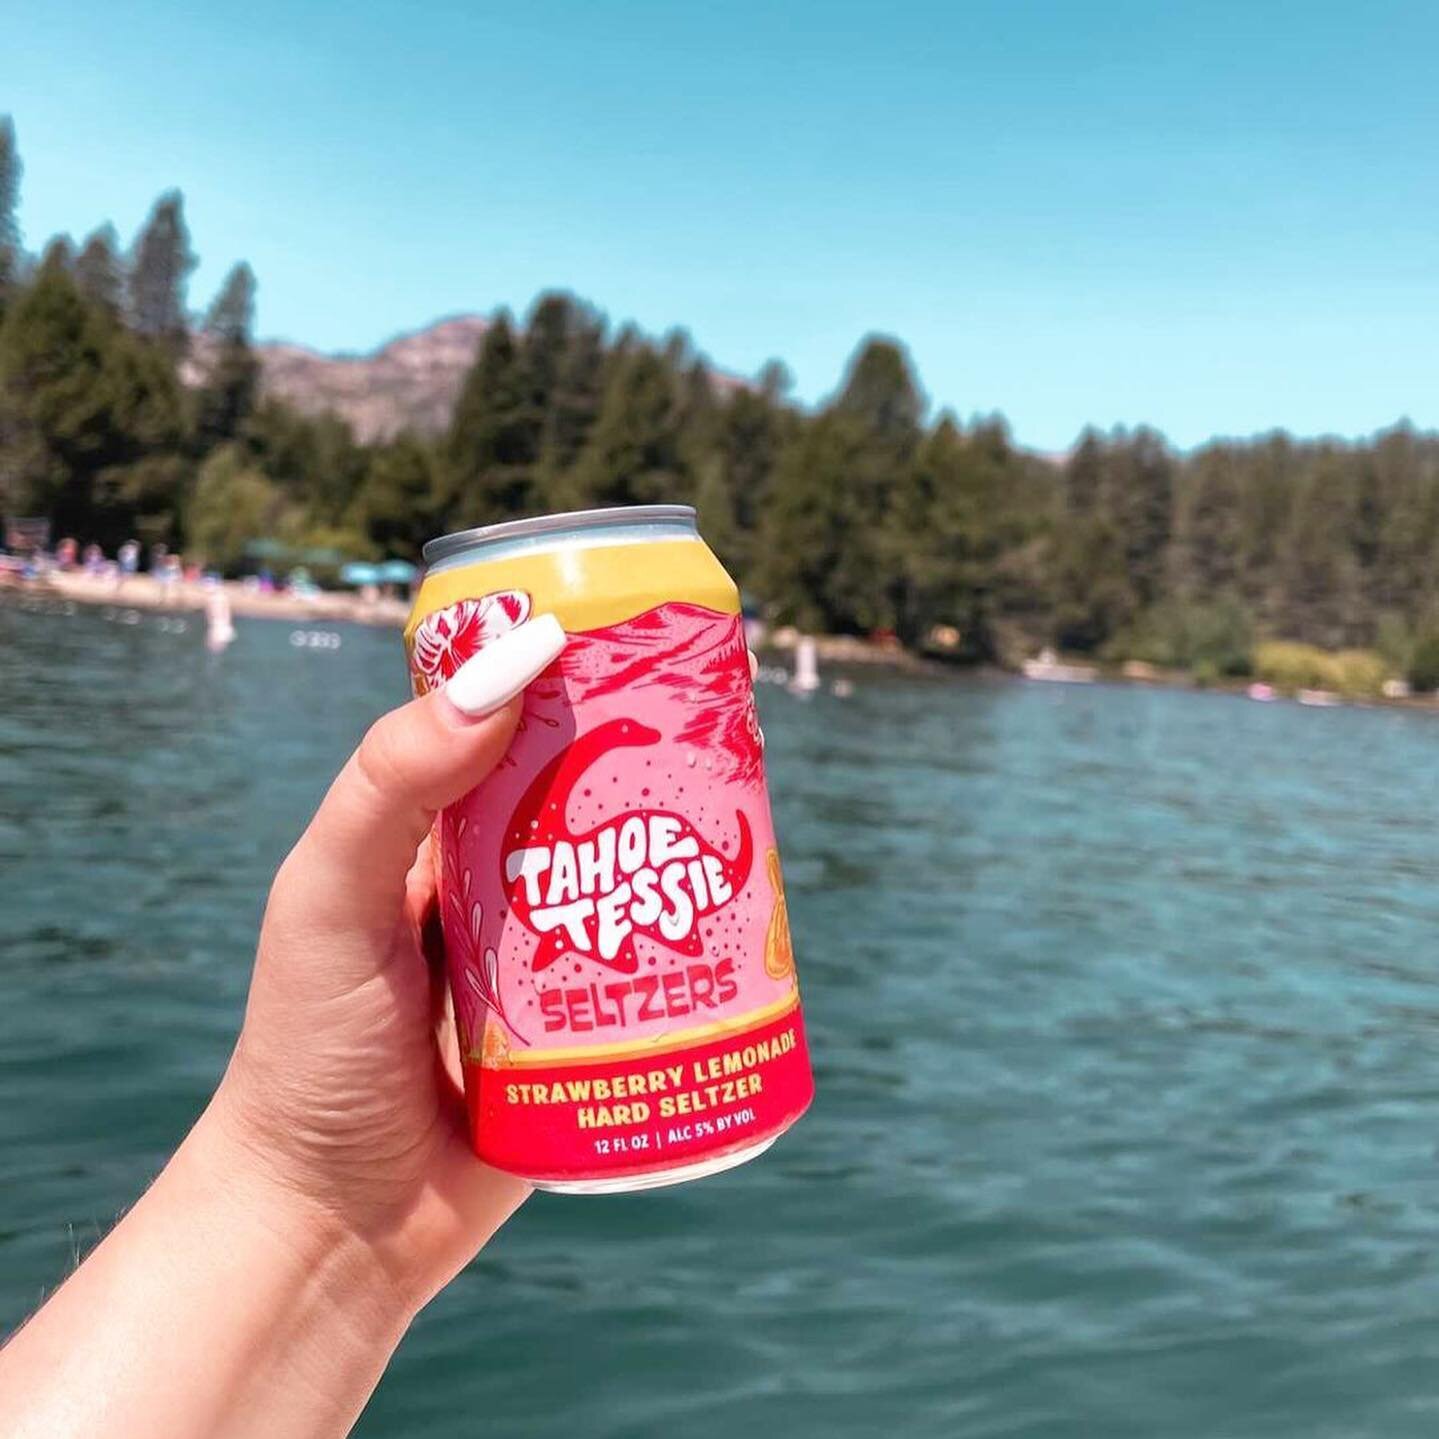 Thank you @blondiibabe for capturing these cool shots of the new strawberry lemonade hard seltzer by @tahoe_tessie_ @recordstreetbrewing 🦕🍻I can&rsquo;t wait to visit Lake Tahoe one day! Cheers from the East Coast. ☺️🤟🏻

I had so much fun designi